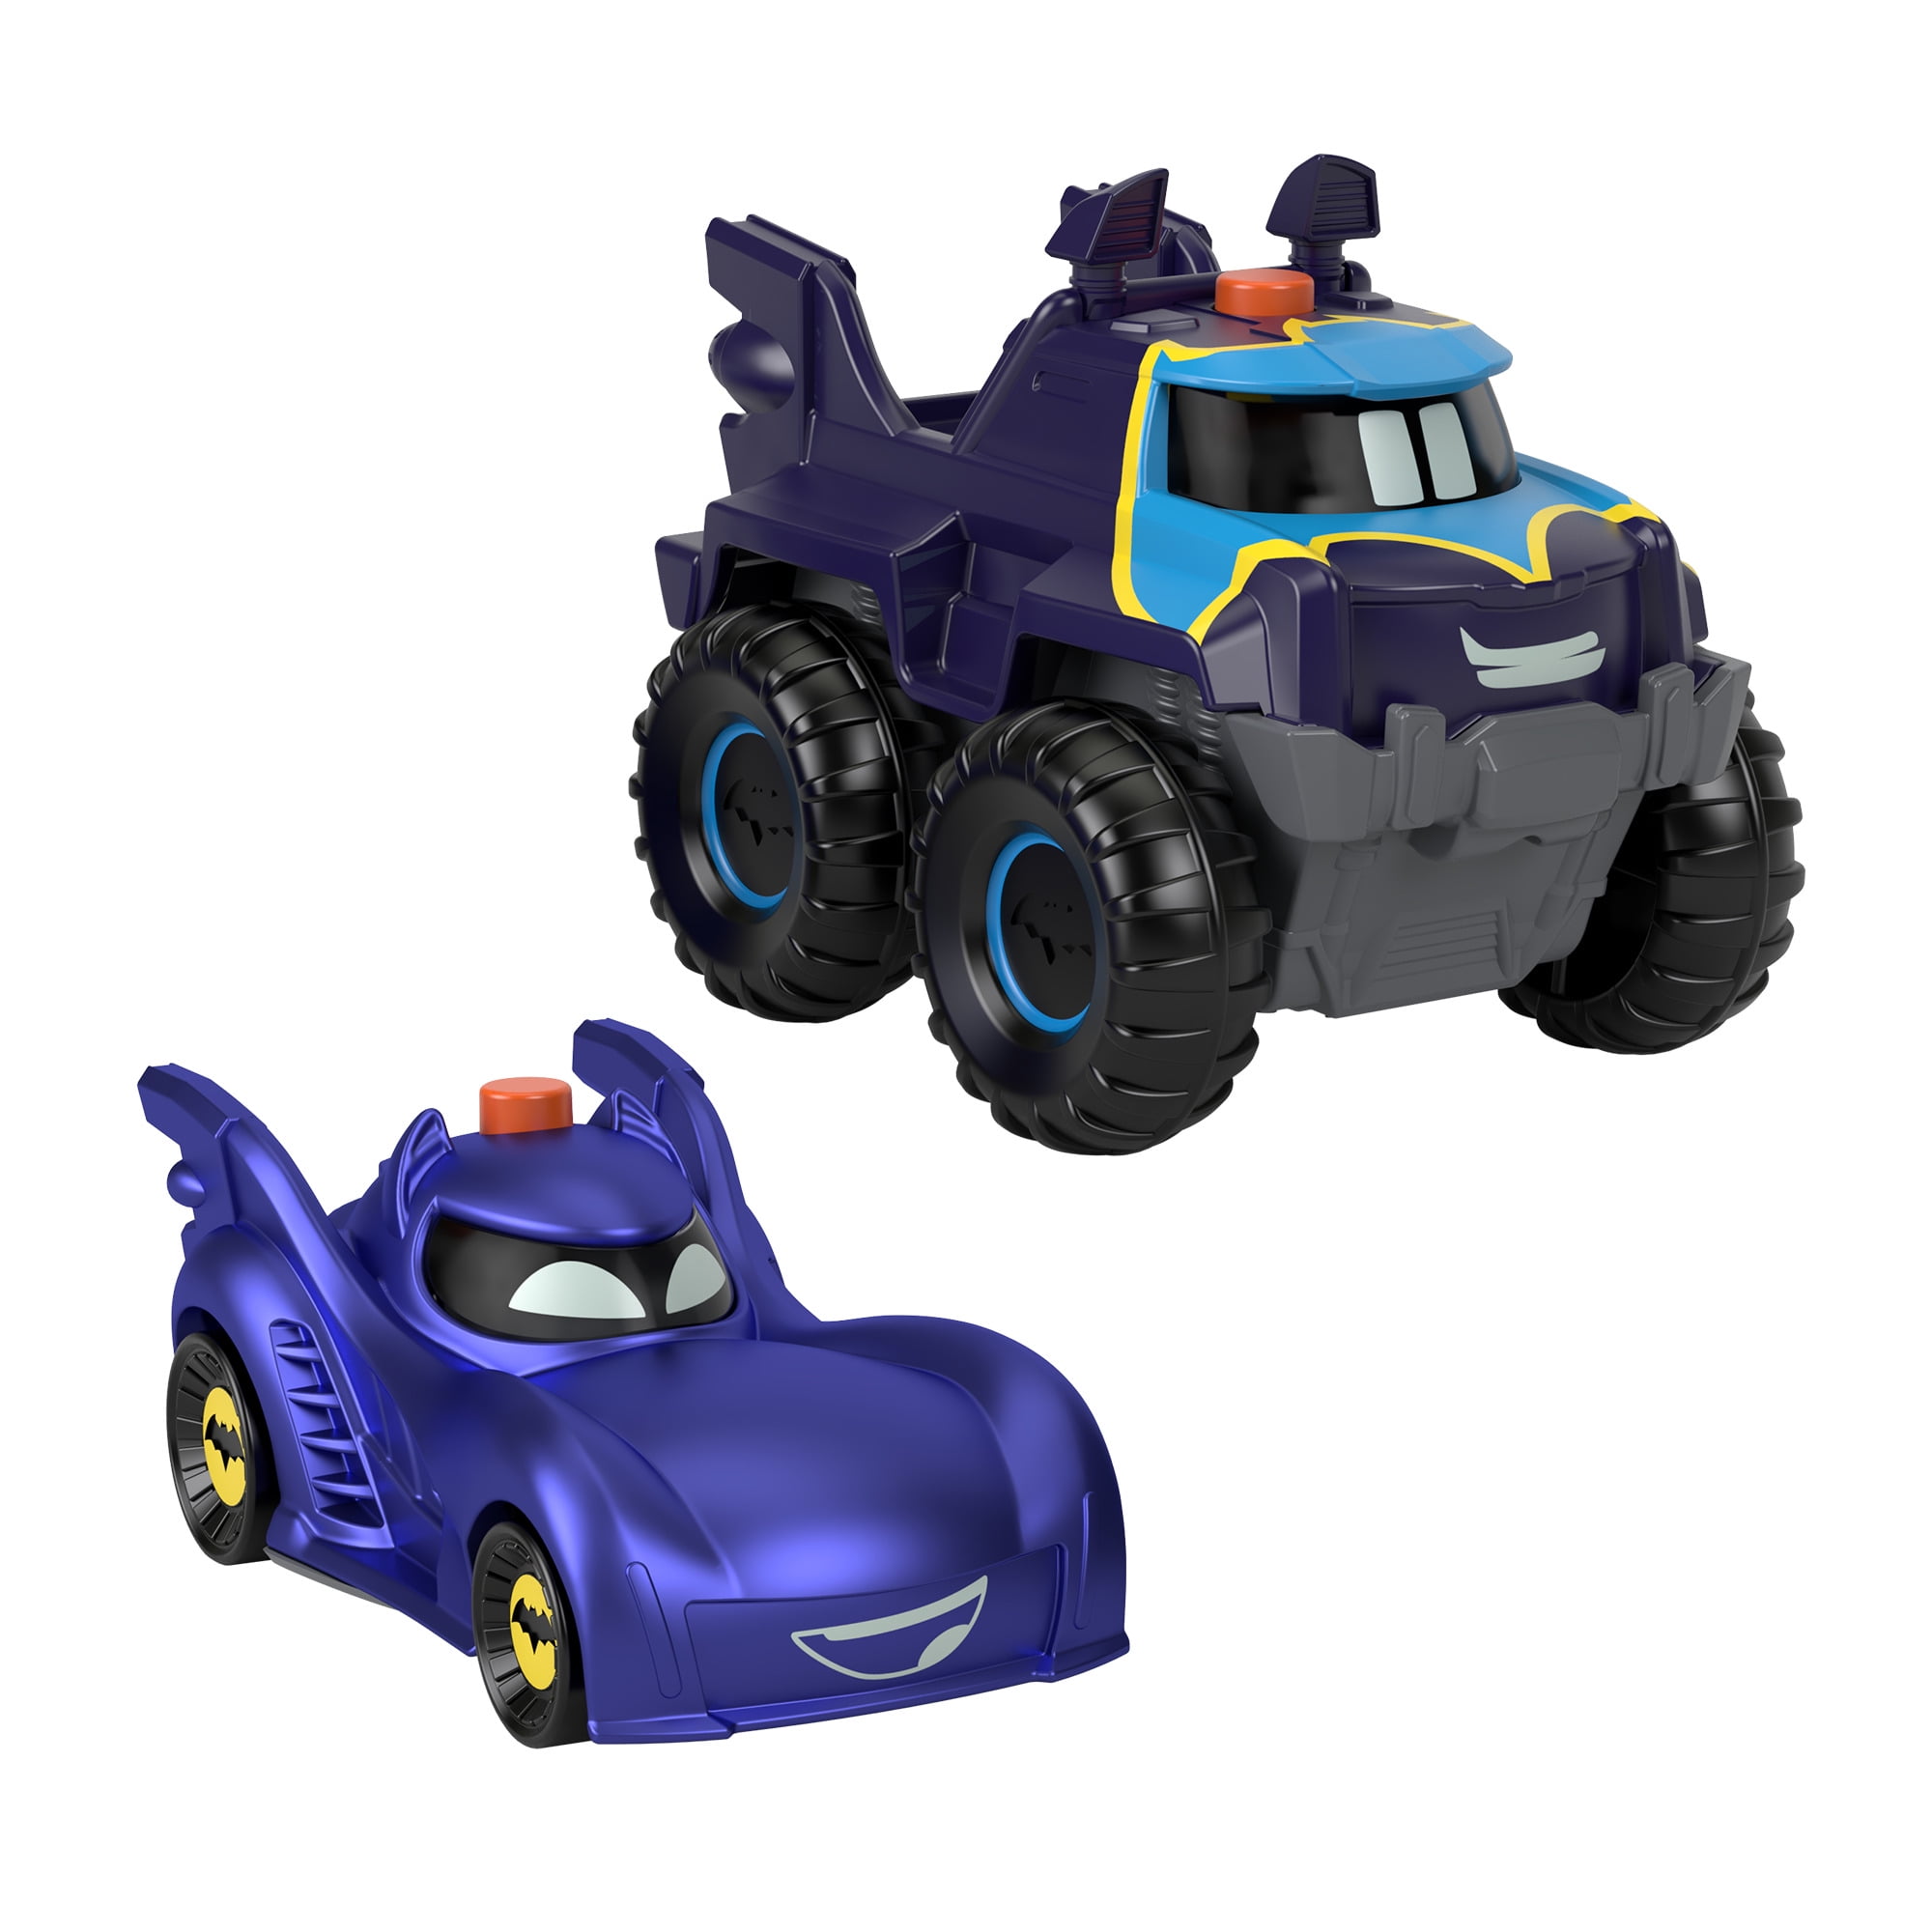 Fisher-Price Batwheels 5-Pack Toy Cars & Vehicles